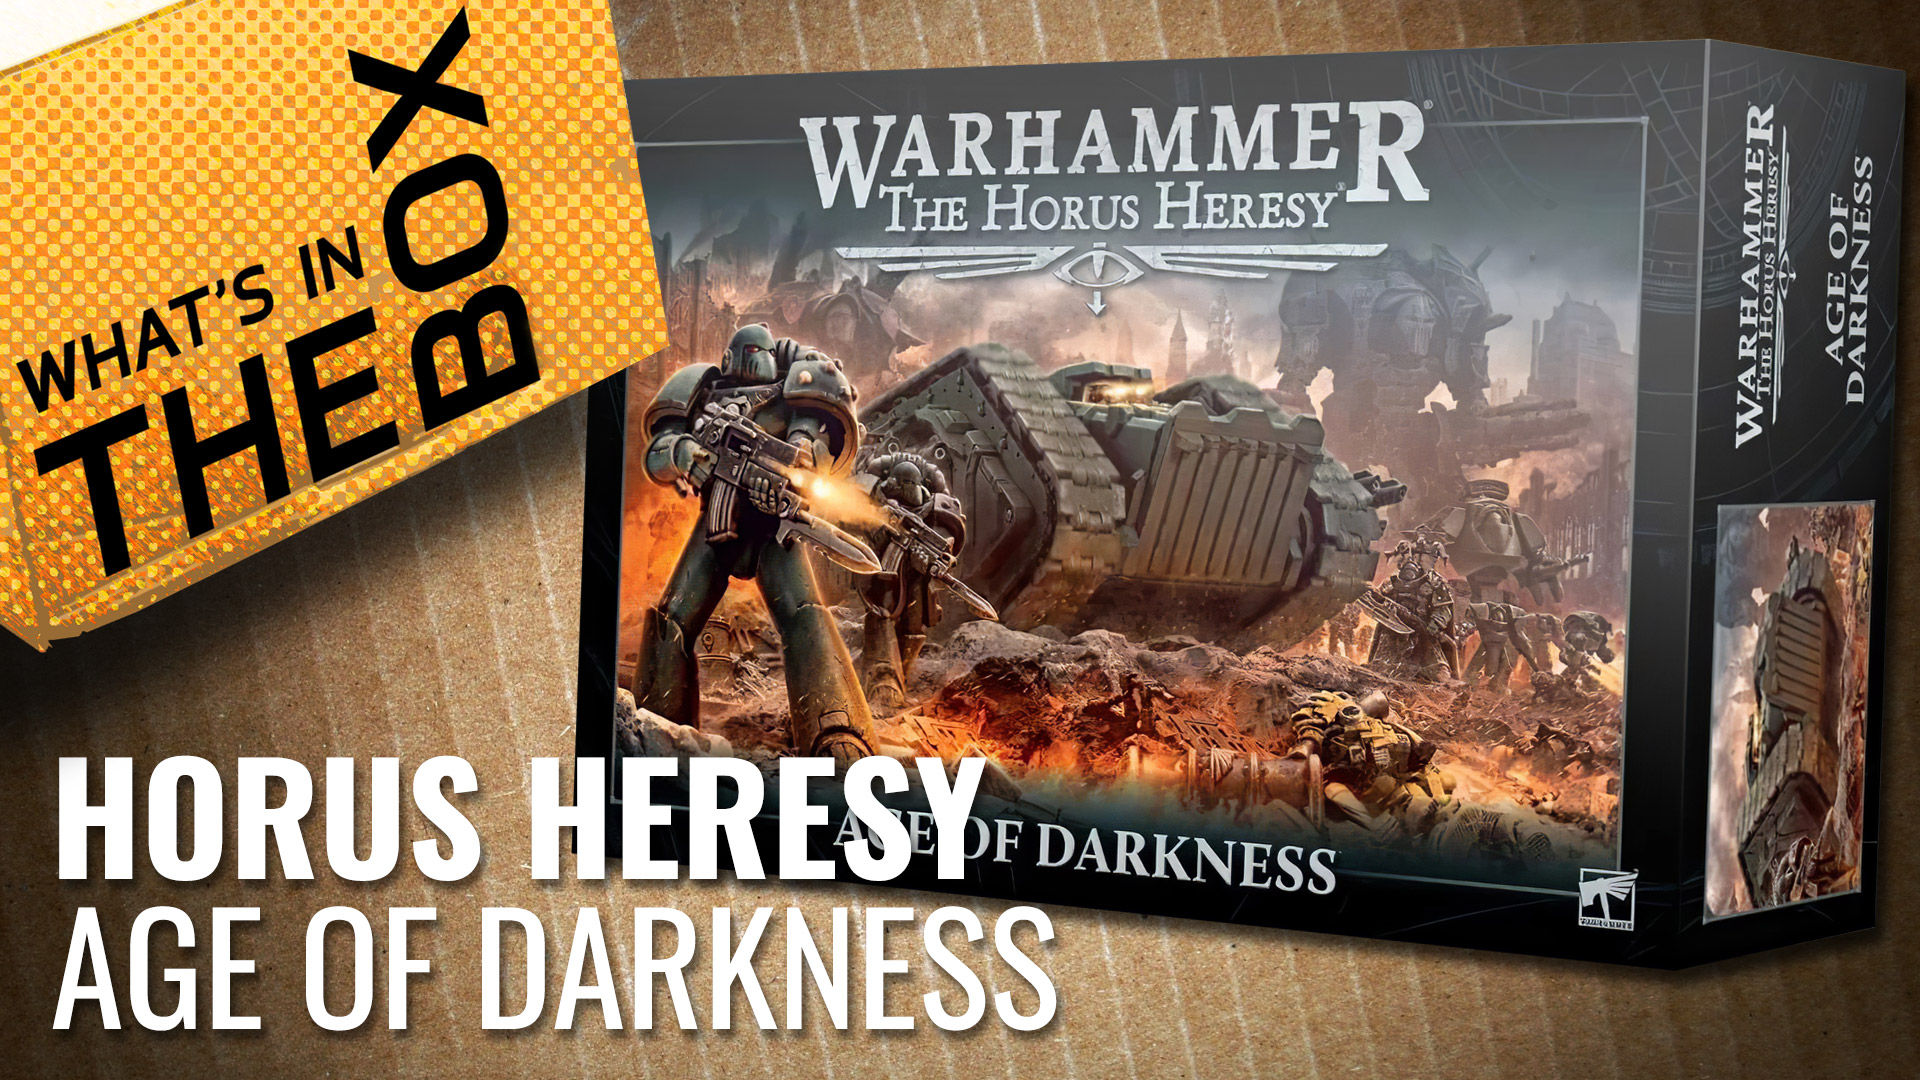 Unboxing---horus-heresy-age-of-darkness-coverimage